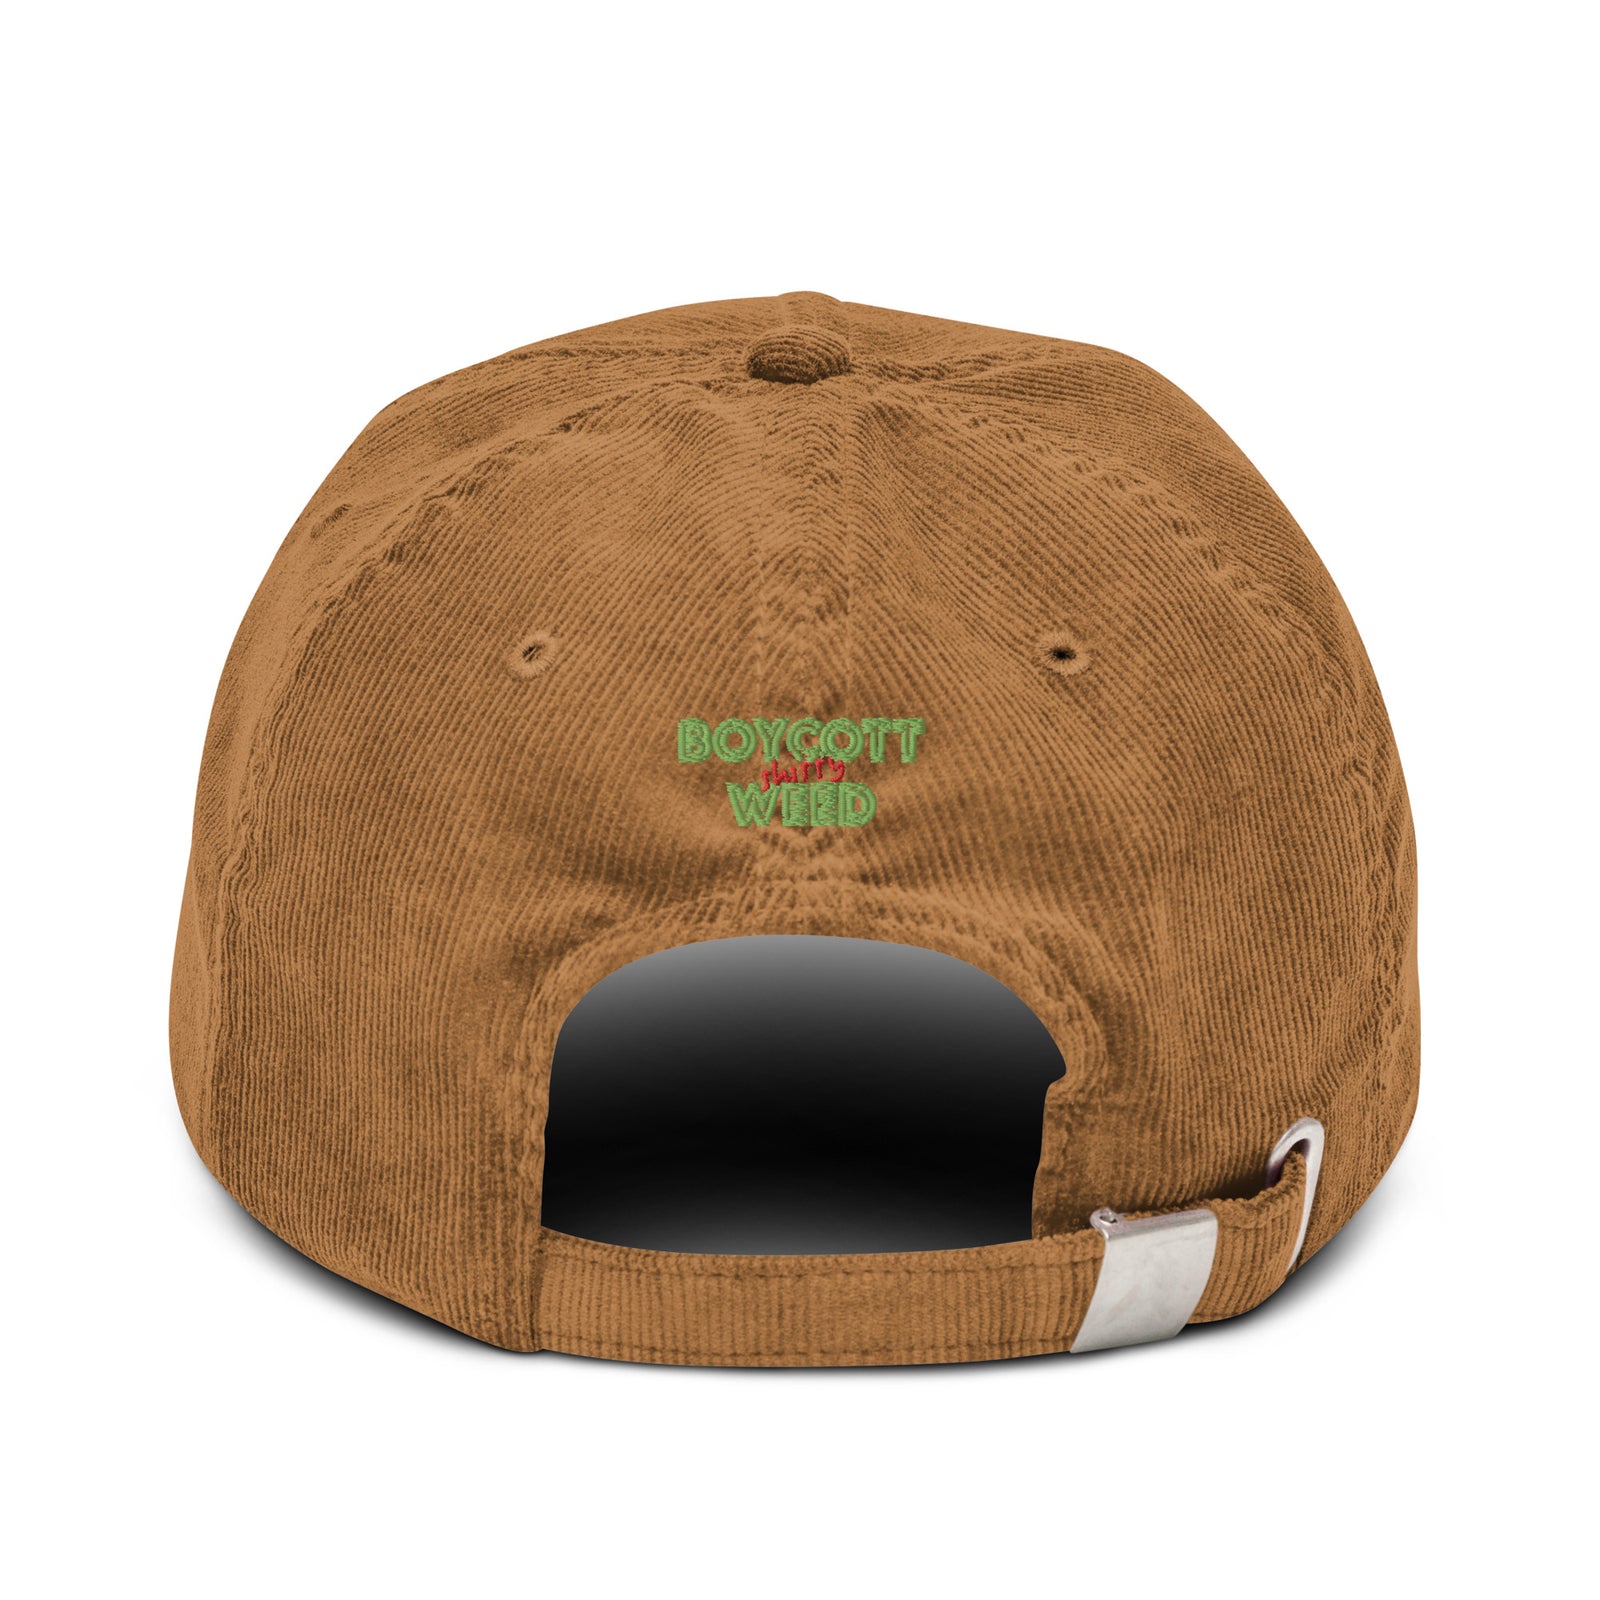 Vipers Corduroy Hat